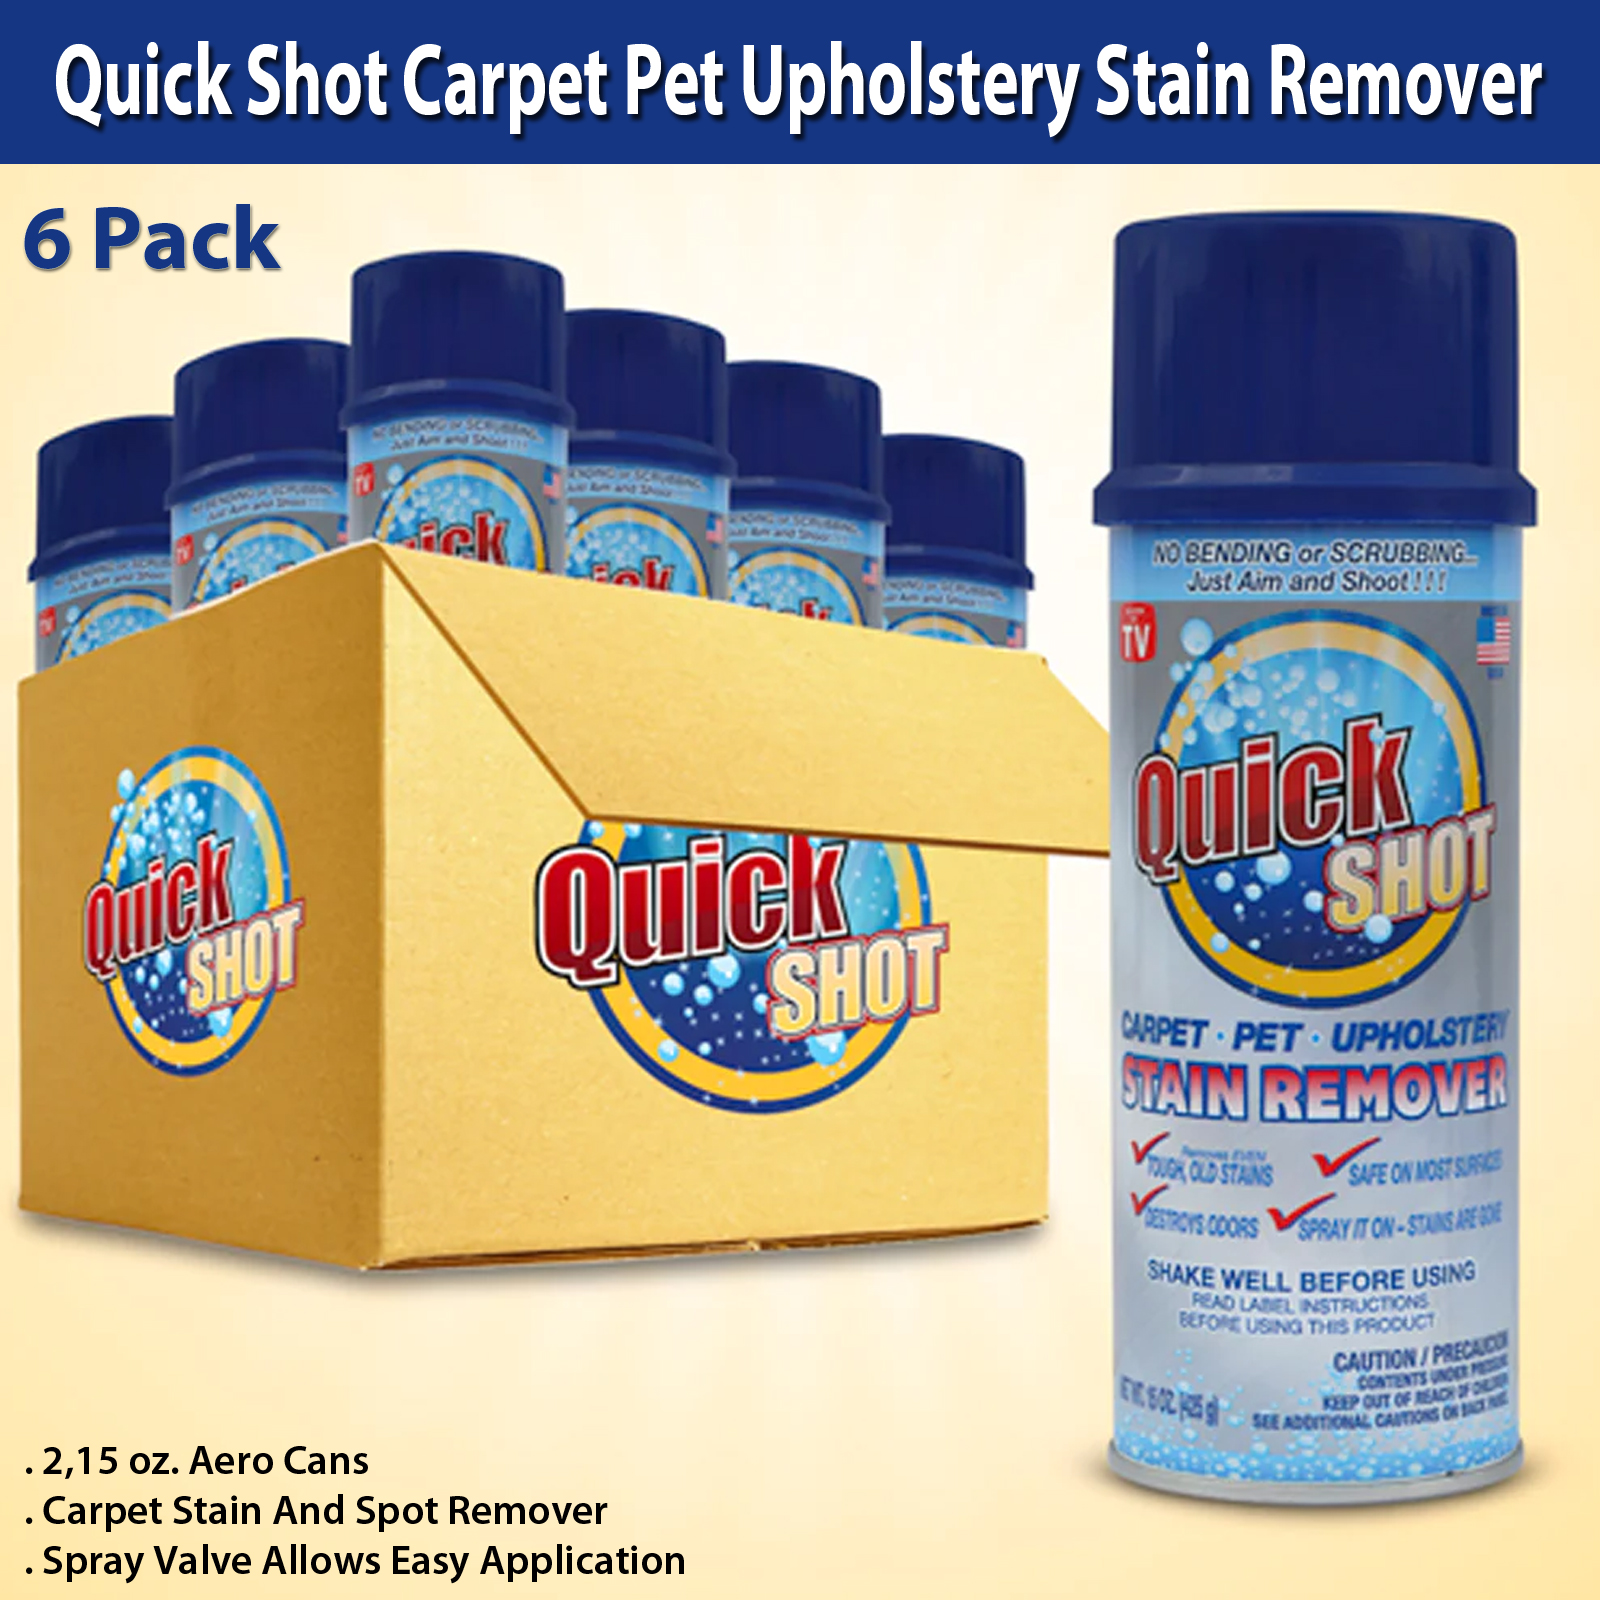 Instagone's Quick Shot Carpet, Pet & Upholstery Stain Remover 6 Pack